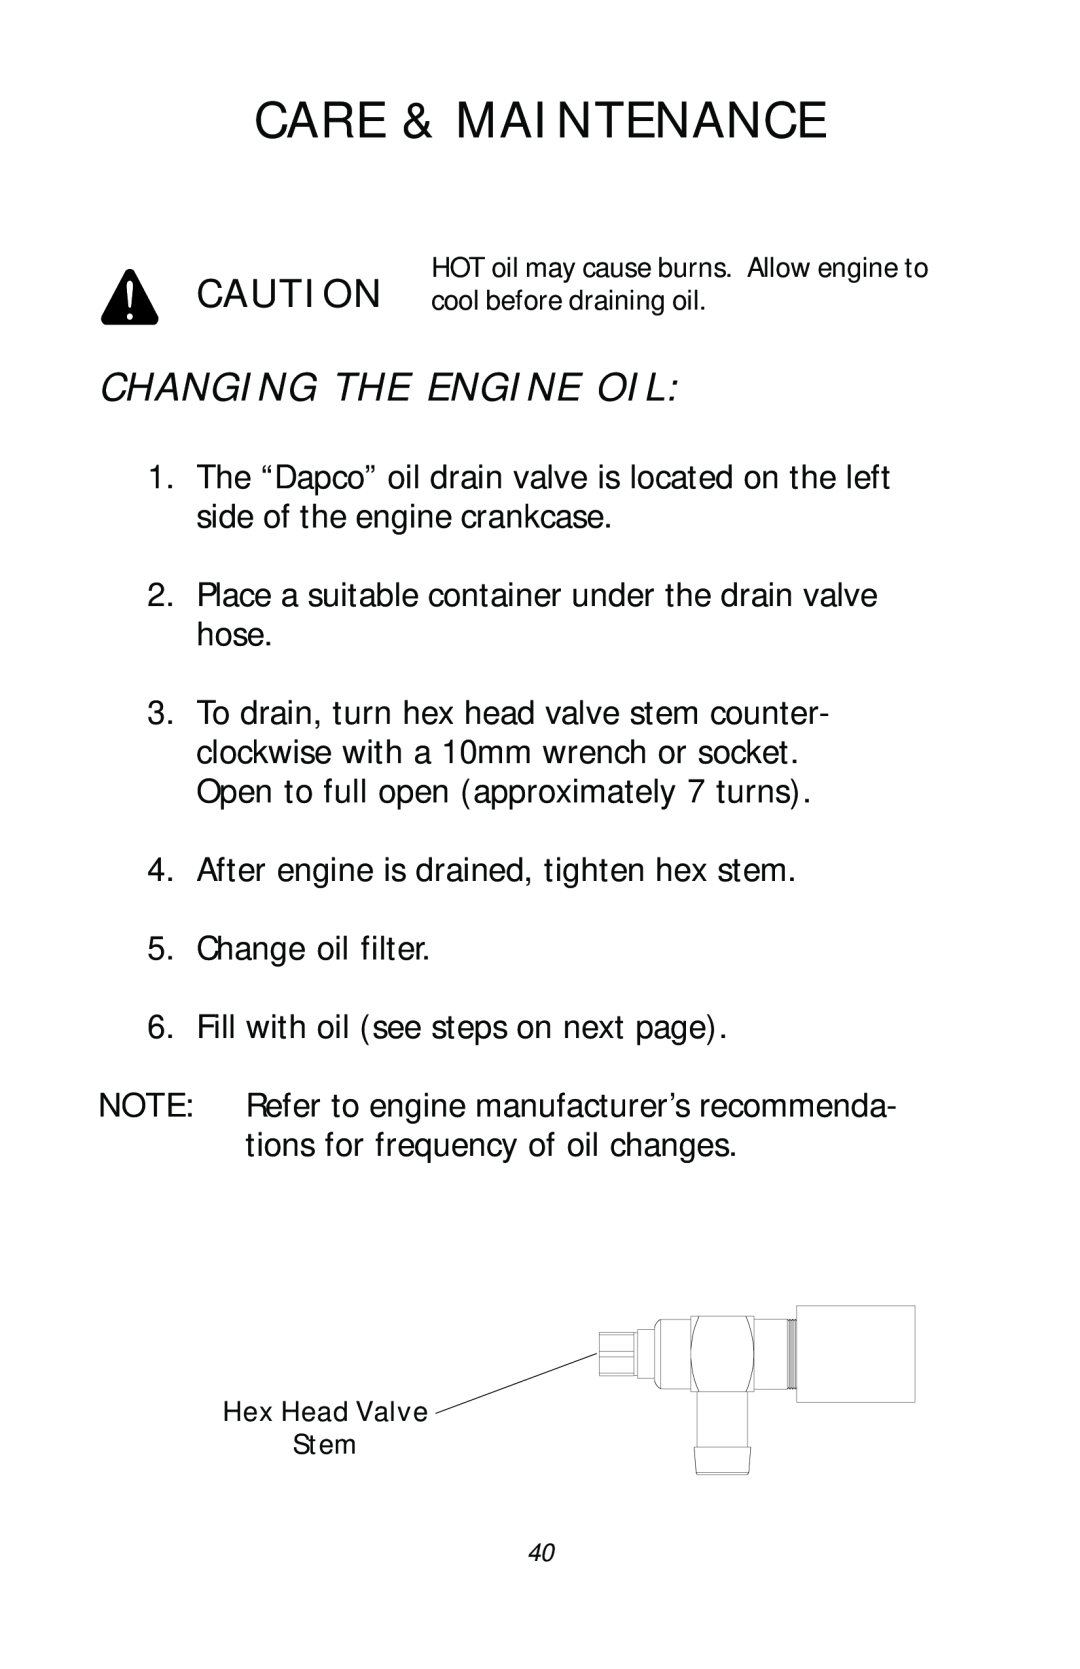 Dixon ZTR RAM 50, 17411-1103 manual Changing The Engine Oil, Care & Maintenance 